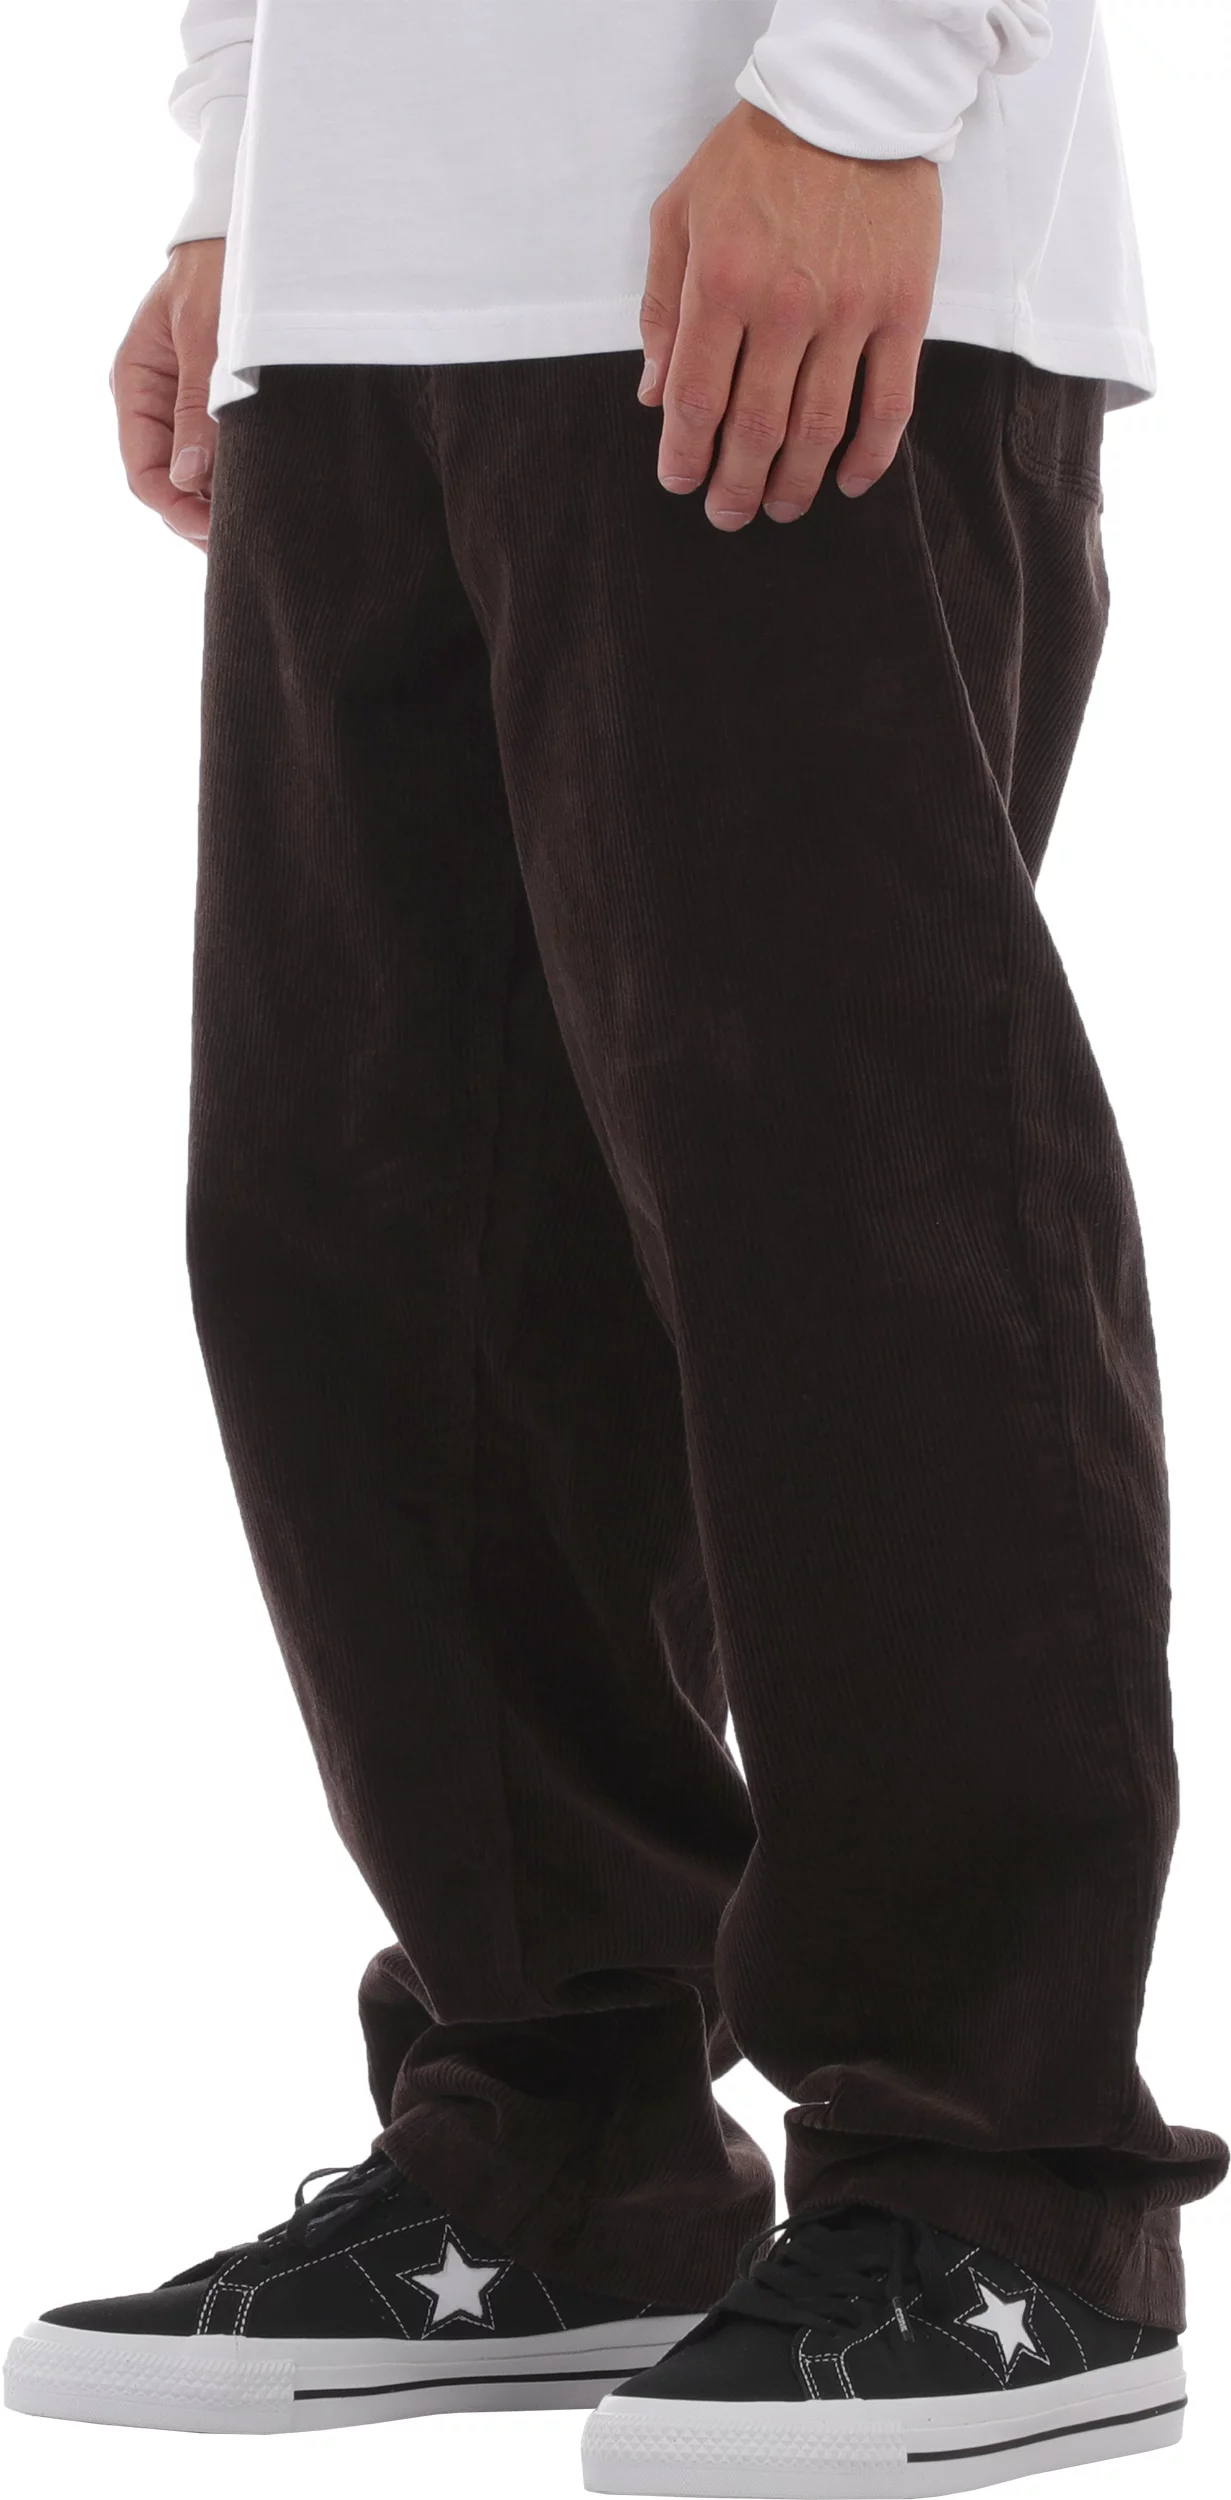 Modown Relaxed Tapered Corduroy Pant - Dark Brown – Volcom